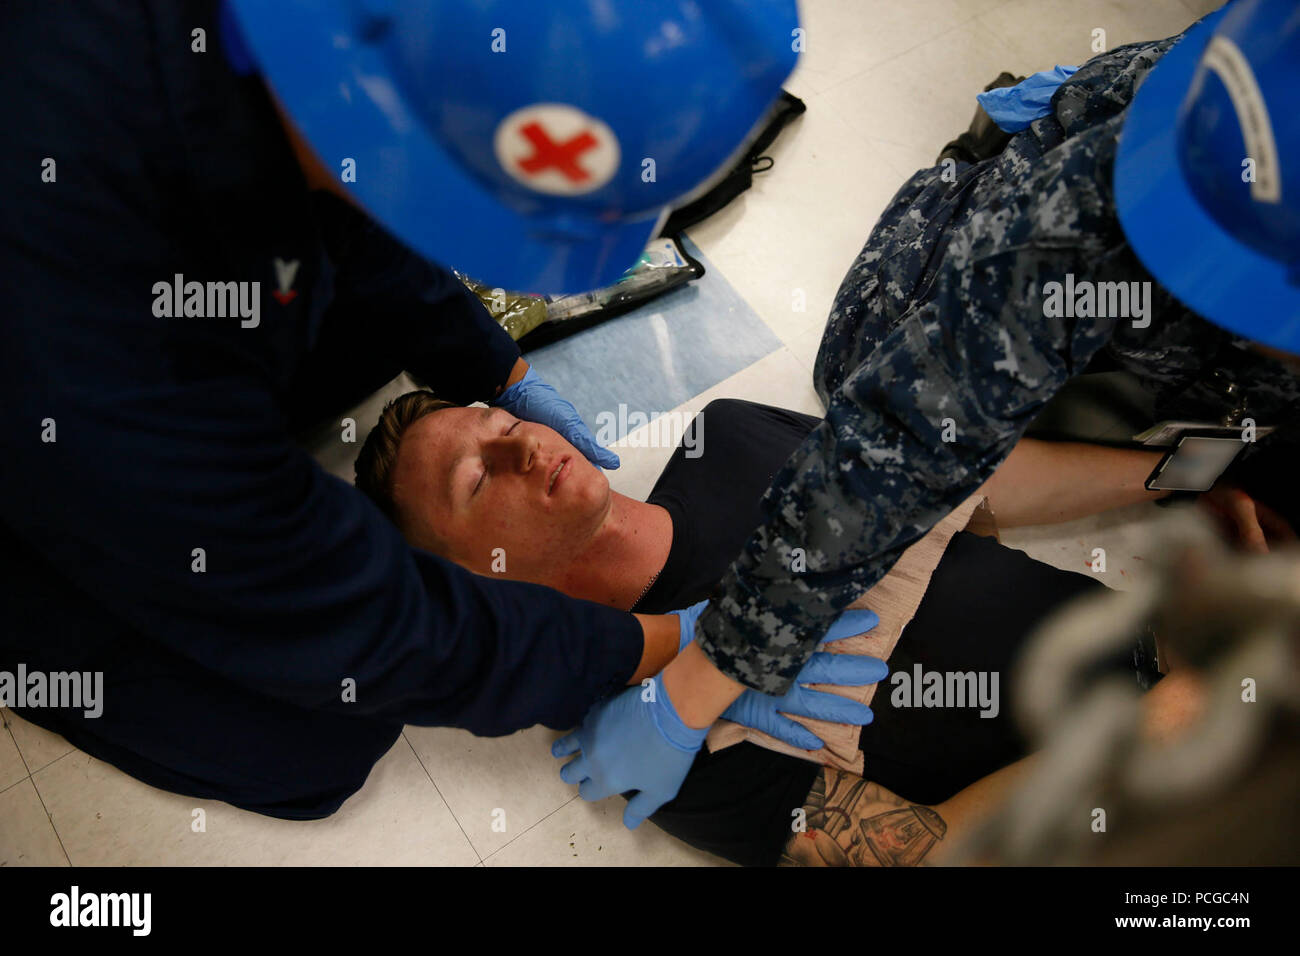 NEWPORT NEWS, Va. (June 8, 2016) – Pre-Commissioning Unit Gerald R. Ford (CVN 78) Hospital Corpsman 3rd Class Briccio Rapido and Hospitalman Hayley Hughes provide medical assistance to a victim's gunshot wound during an active shooter drill in the ship's mess decks. Ford is the first of its class and is under construction at Huntington Ingalls Newport News Shipbuilding. Stock Photo